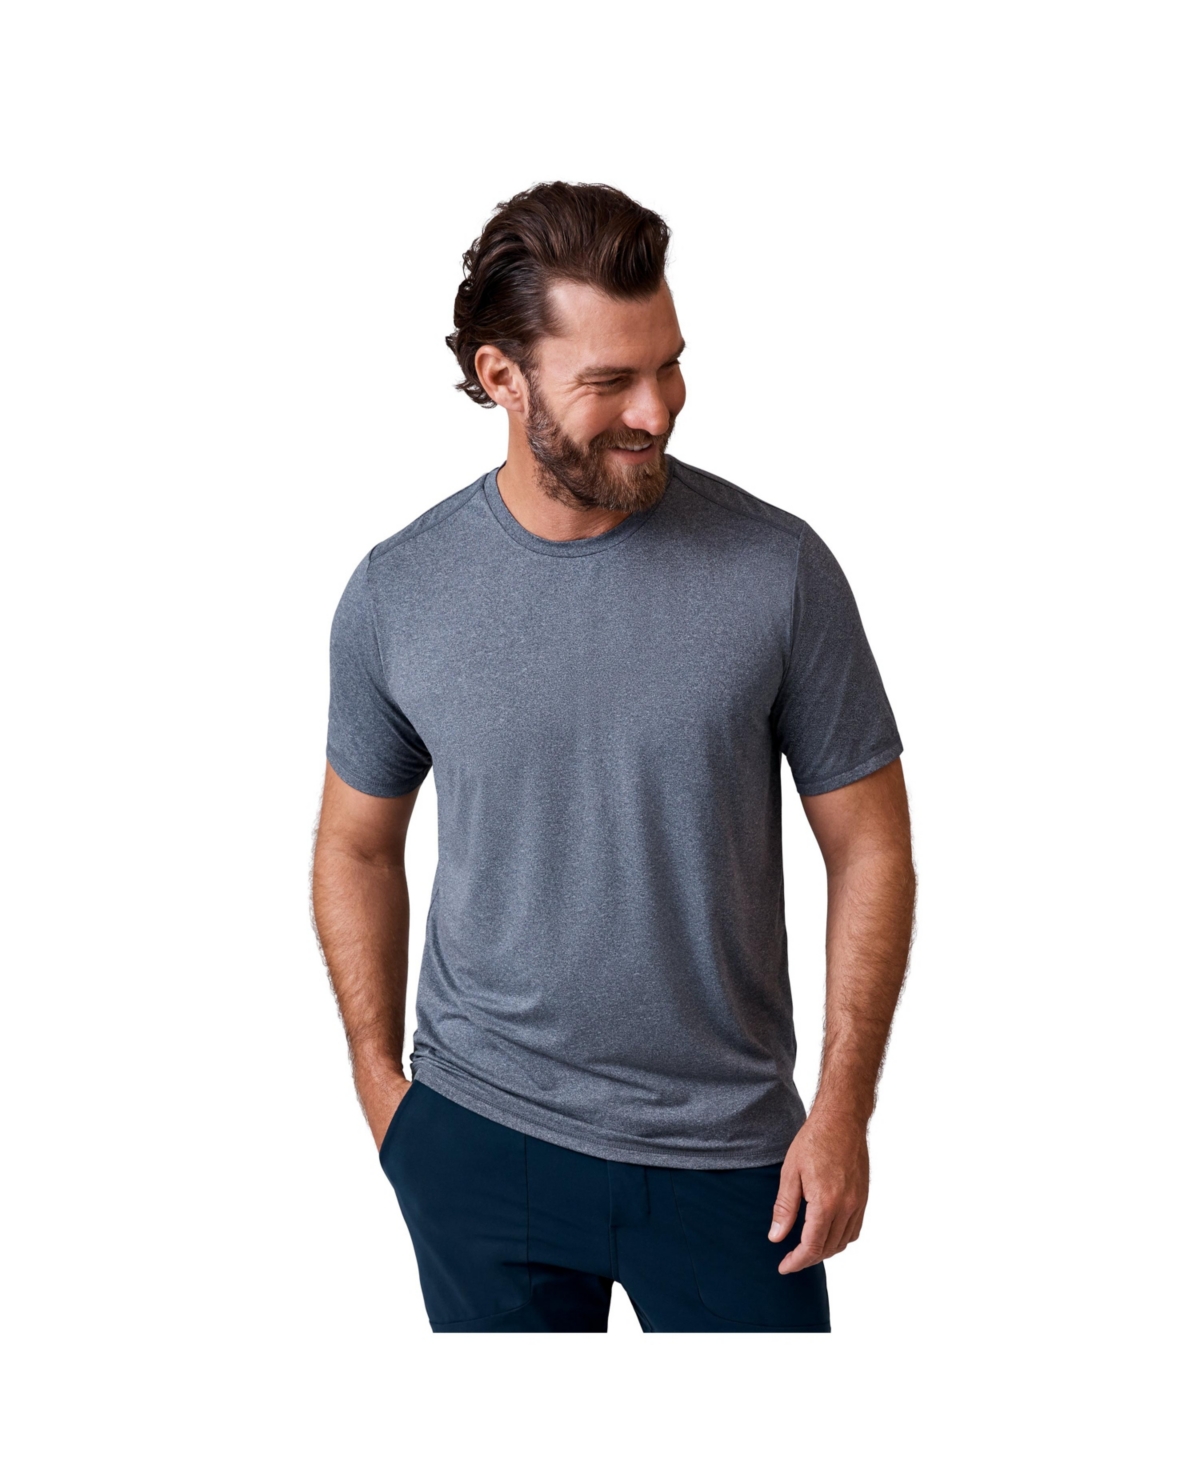 Men's Microtech Chill Cooling Crew Tee - Light grey